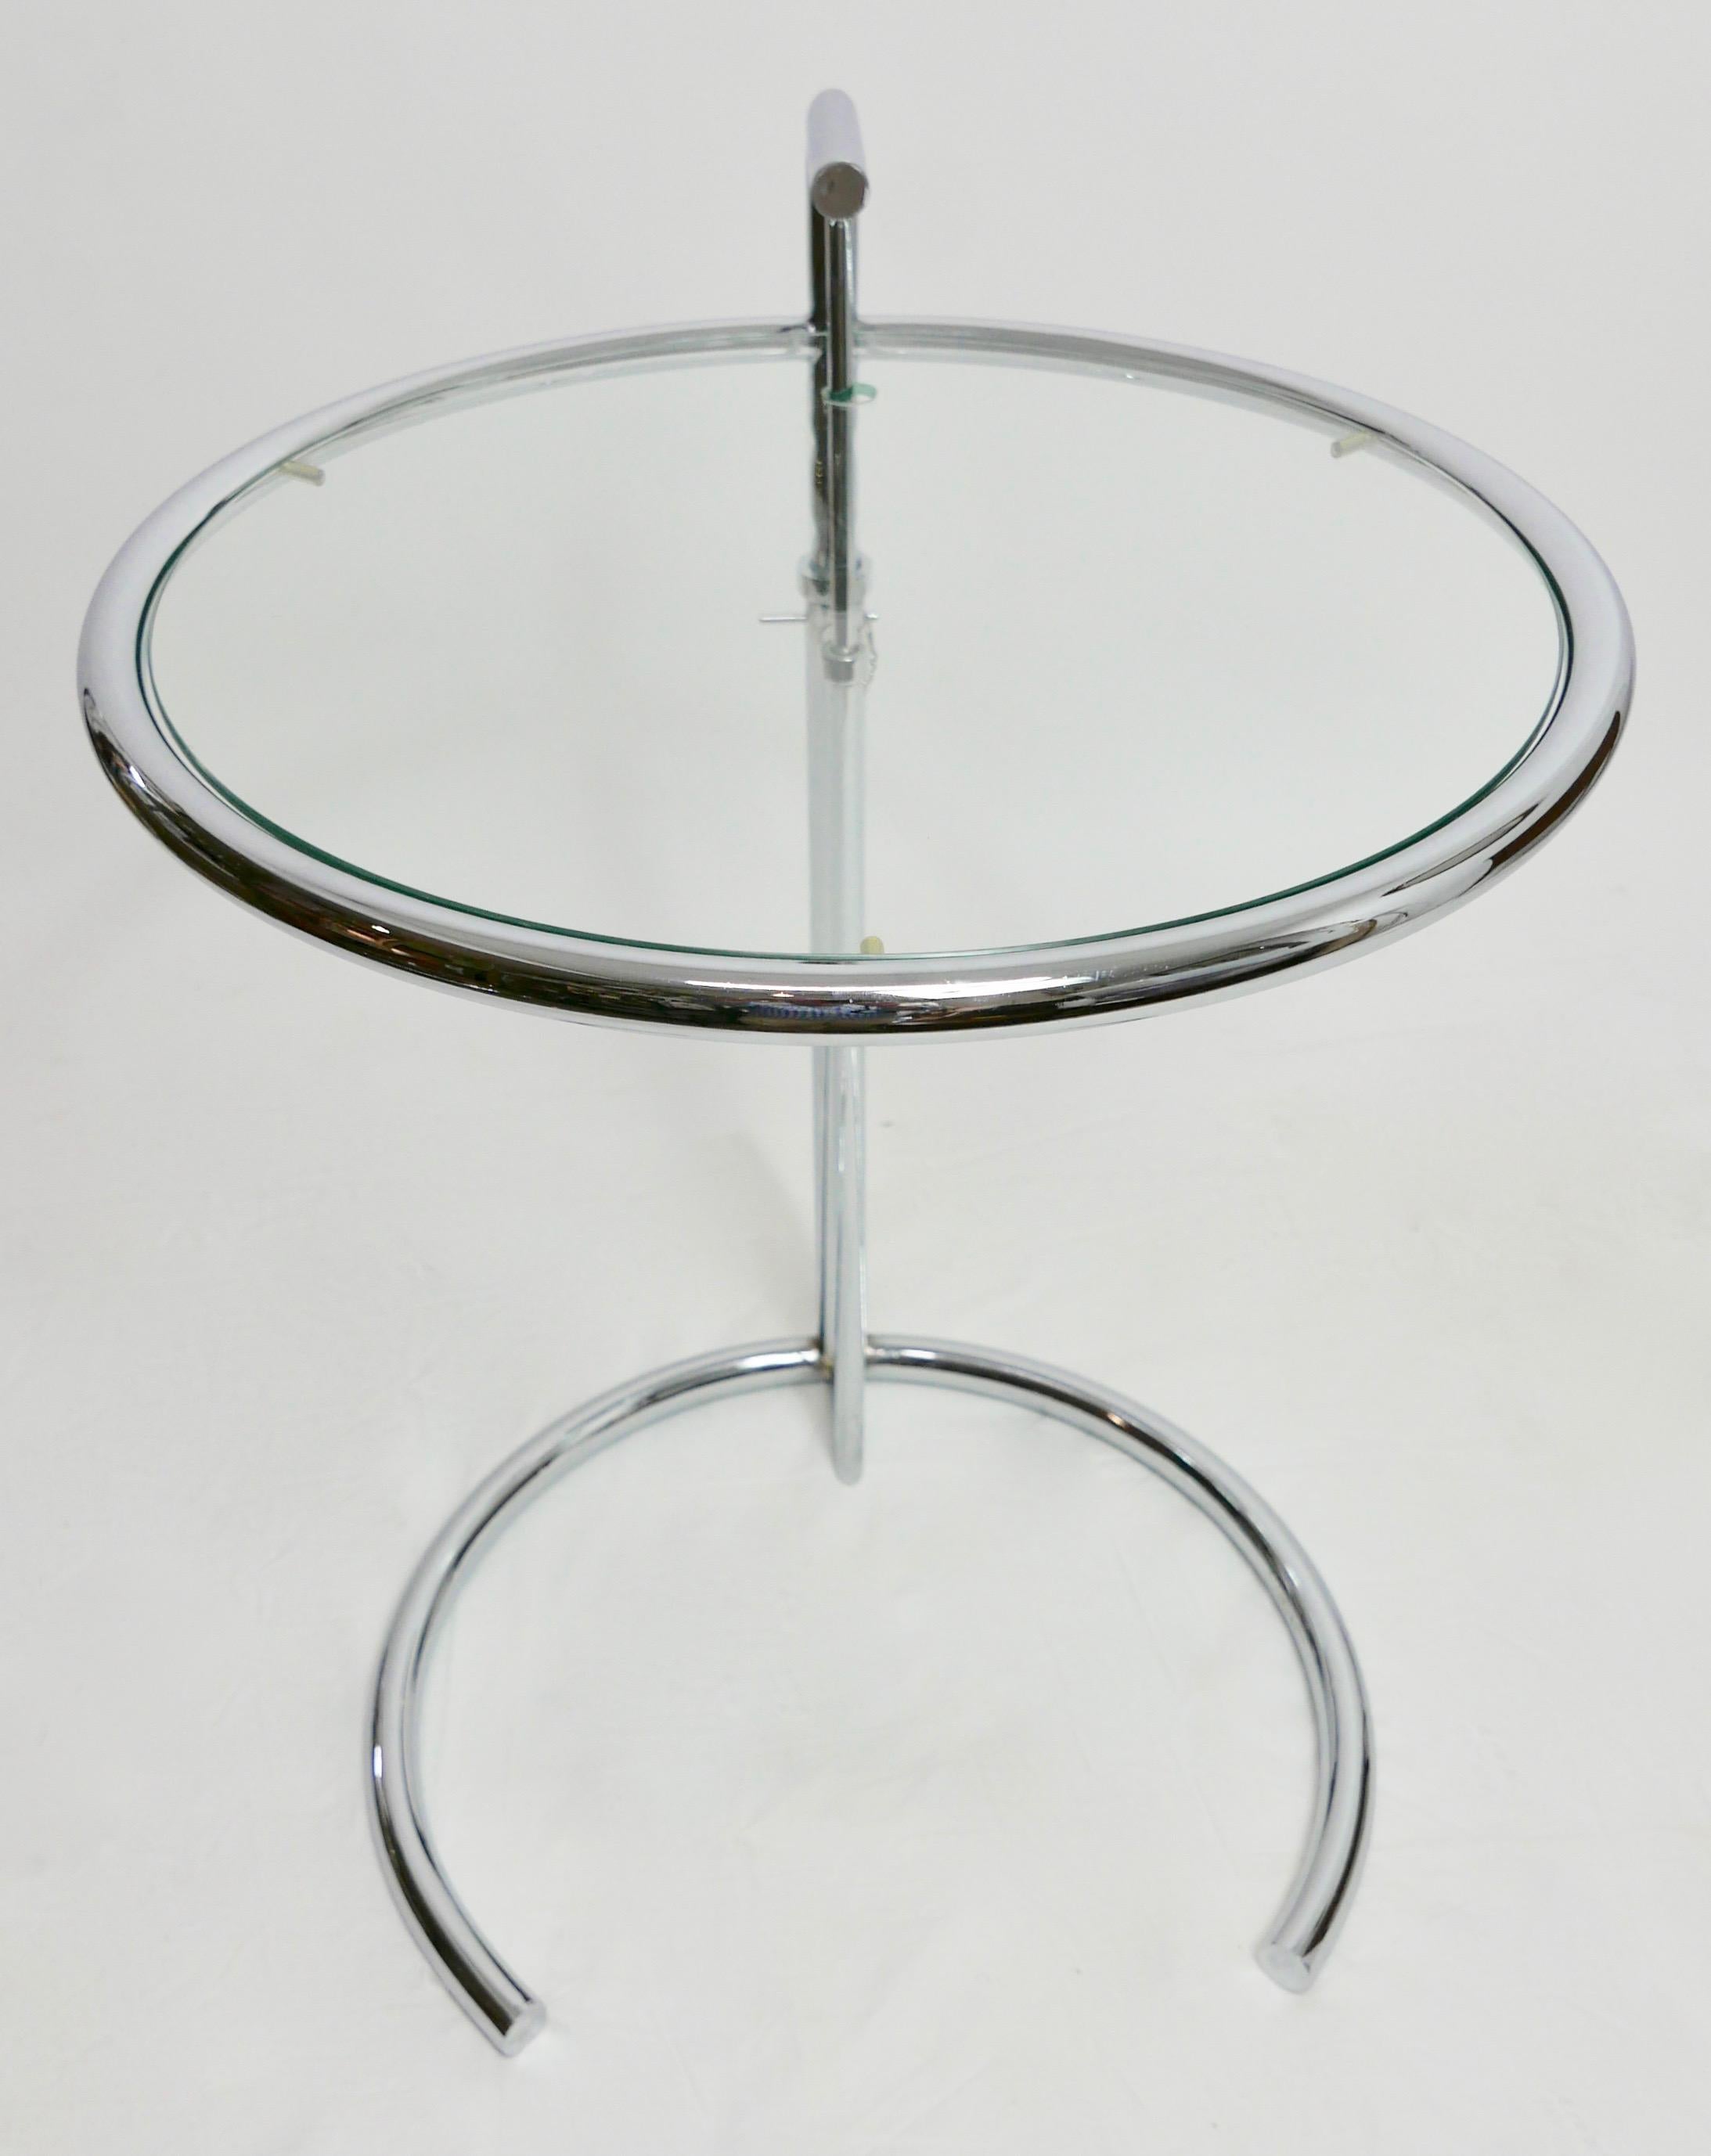 Pair of Eileen Gray Style Adjustable Chrome Metal and Glass Side Tables 1